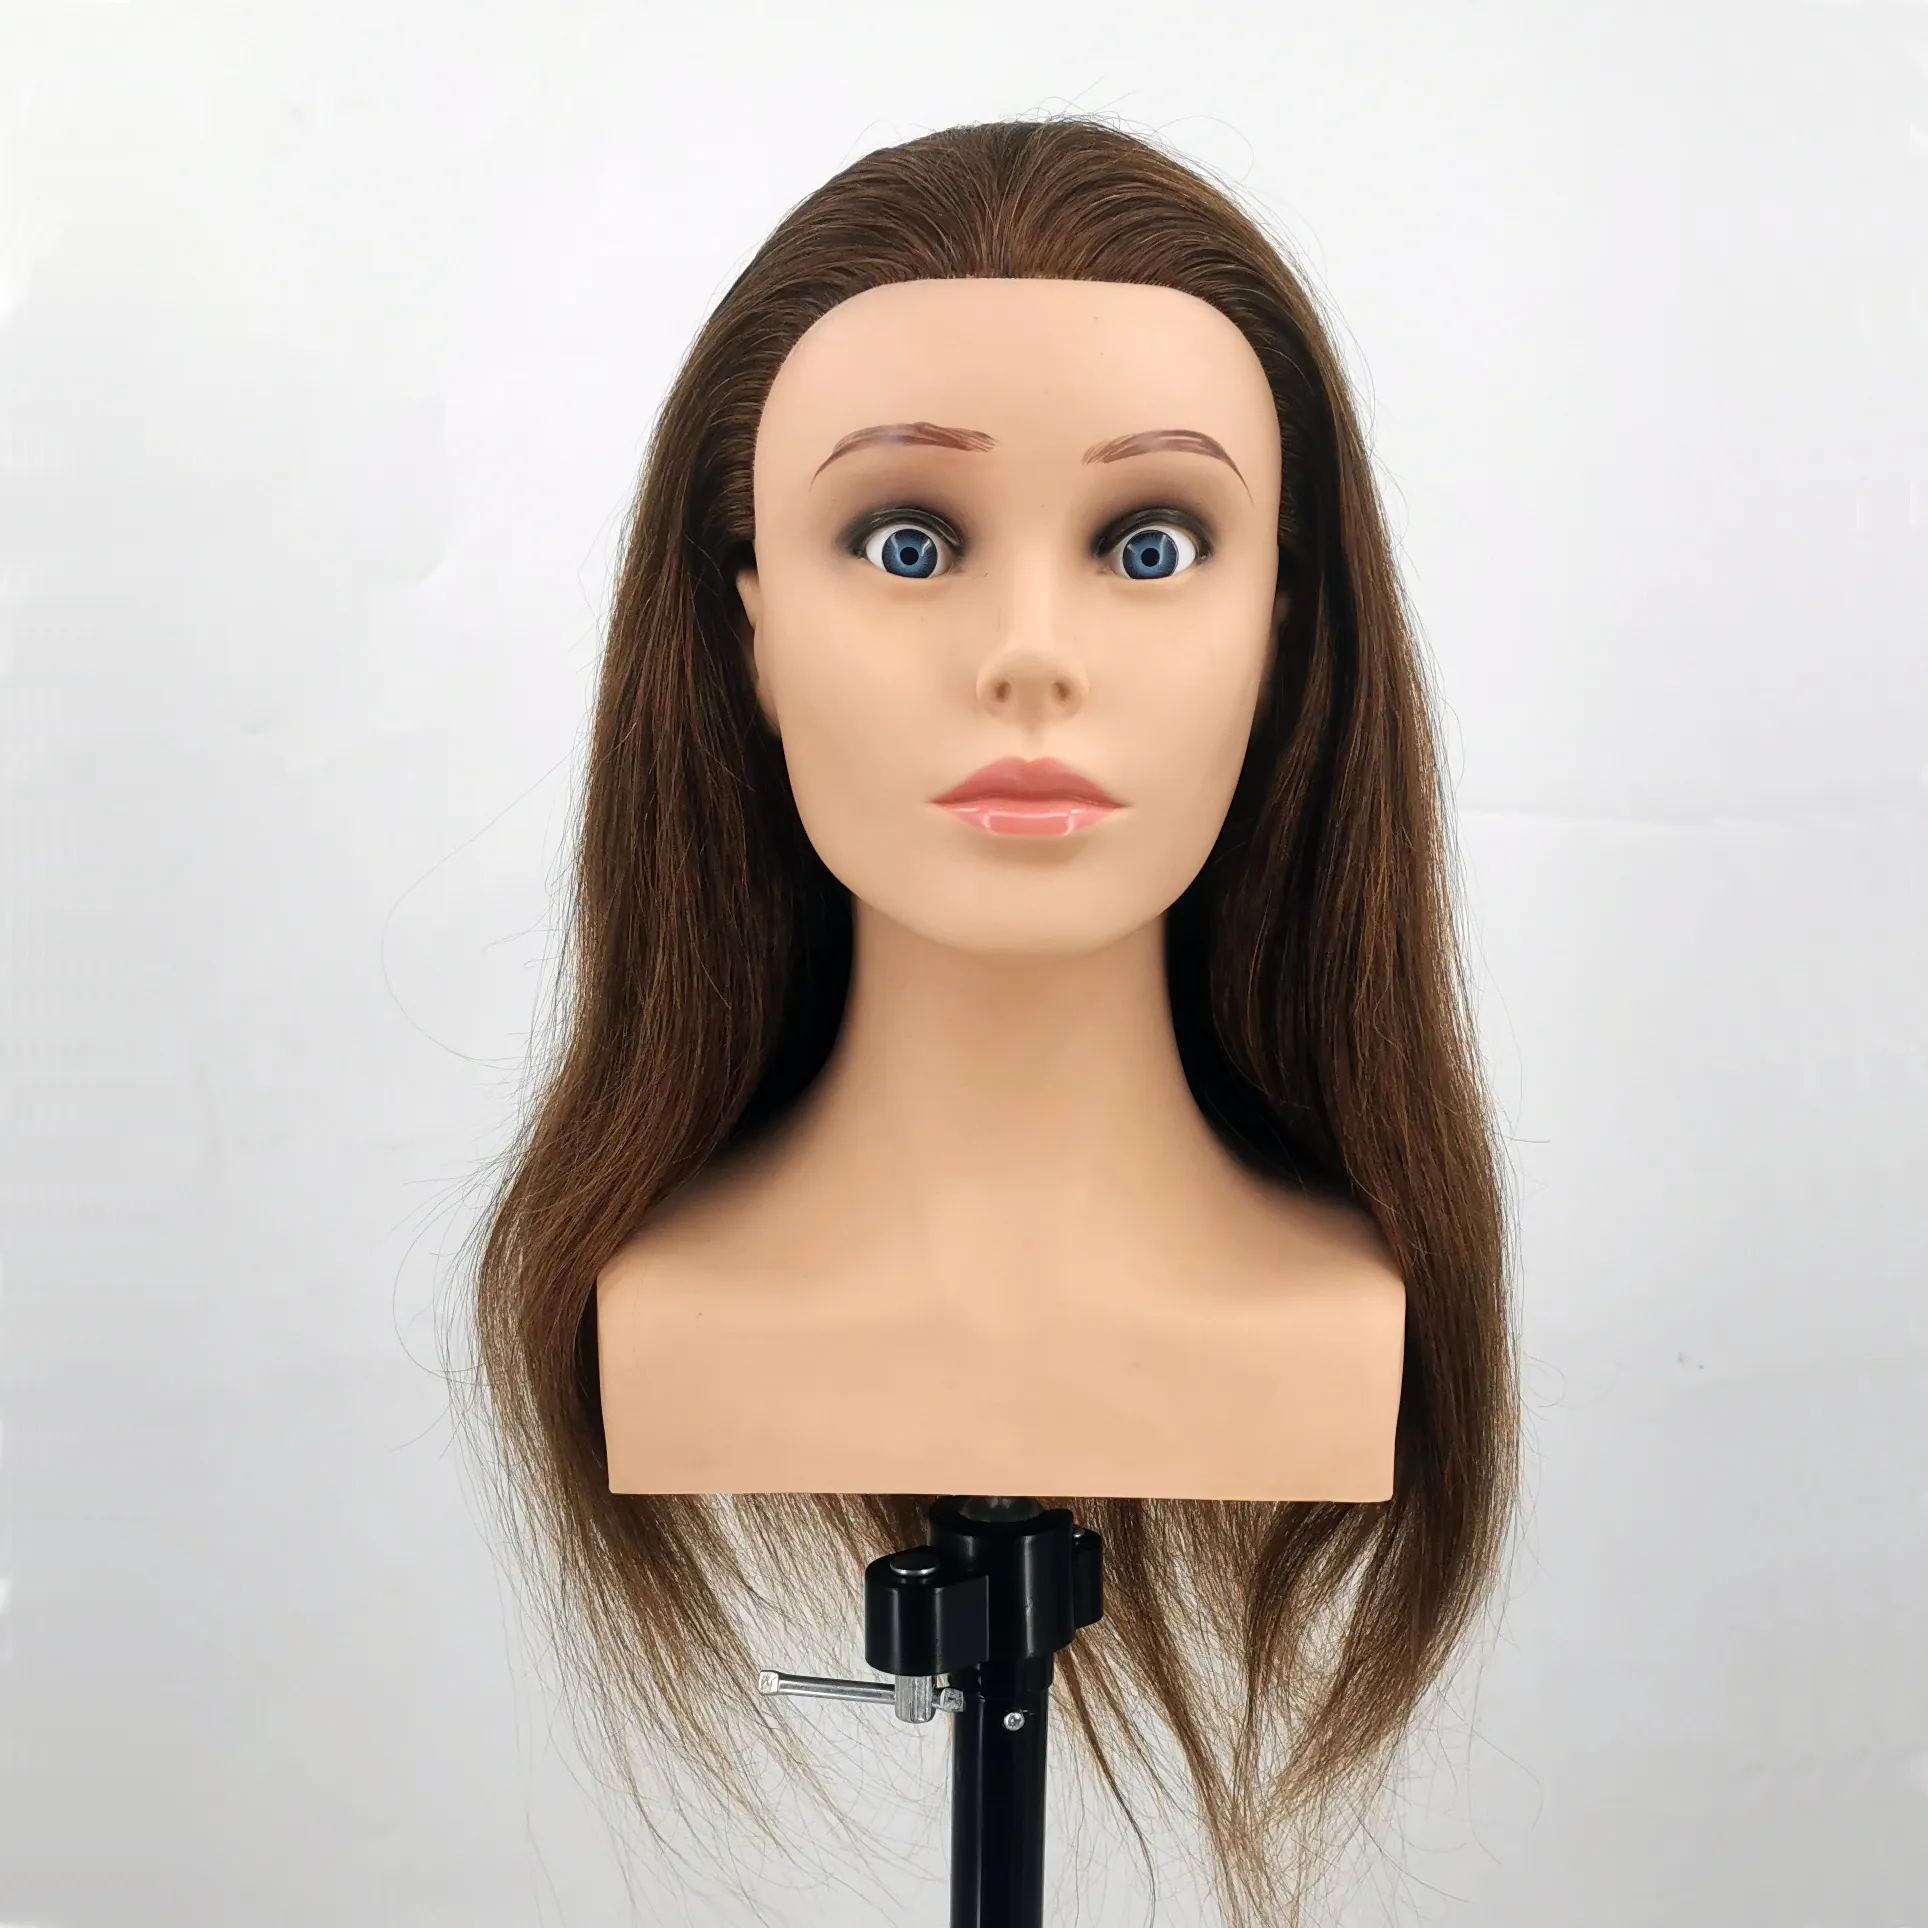 4# 100% Human Hair Training Head with Shoulder Hair Styling Dying perming Coloring realistic Mannequin Head Dolls